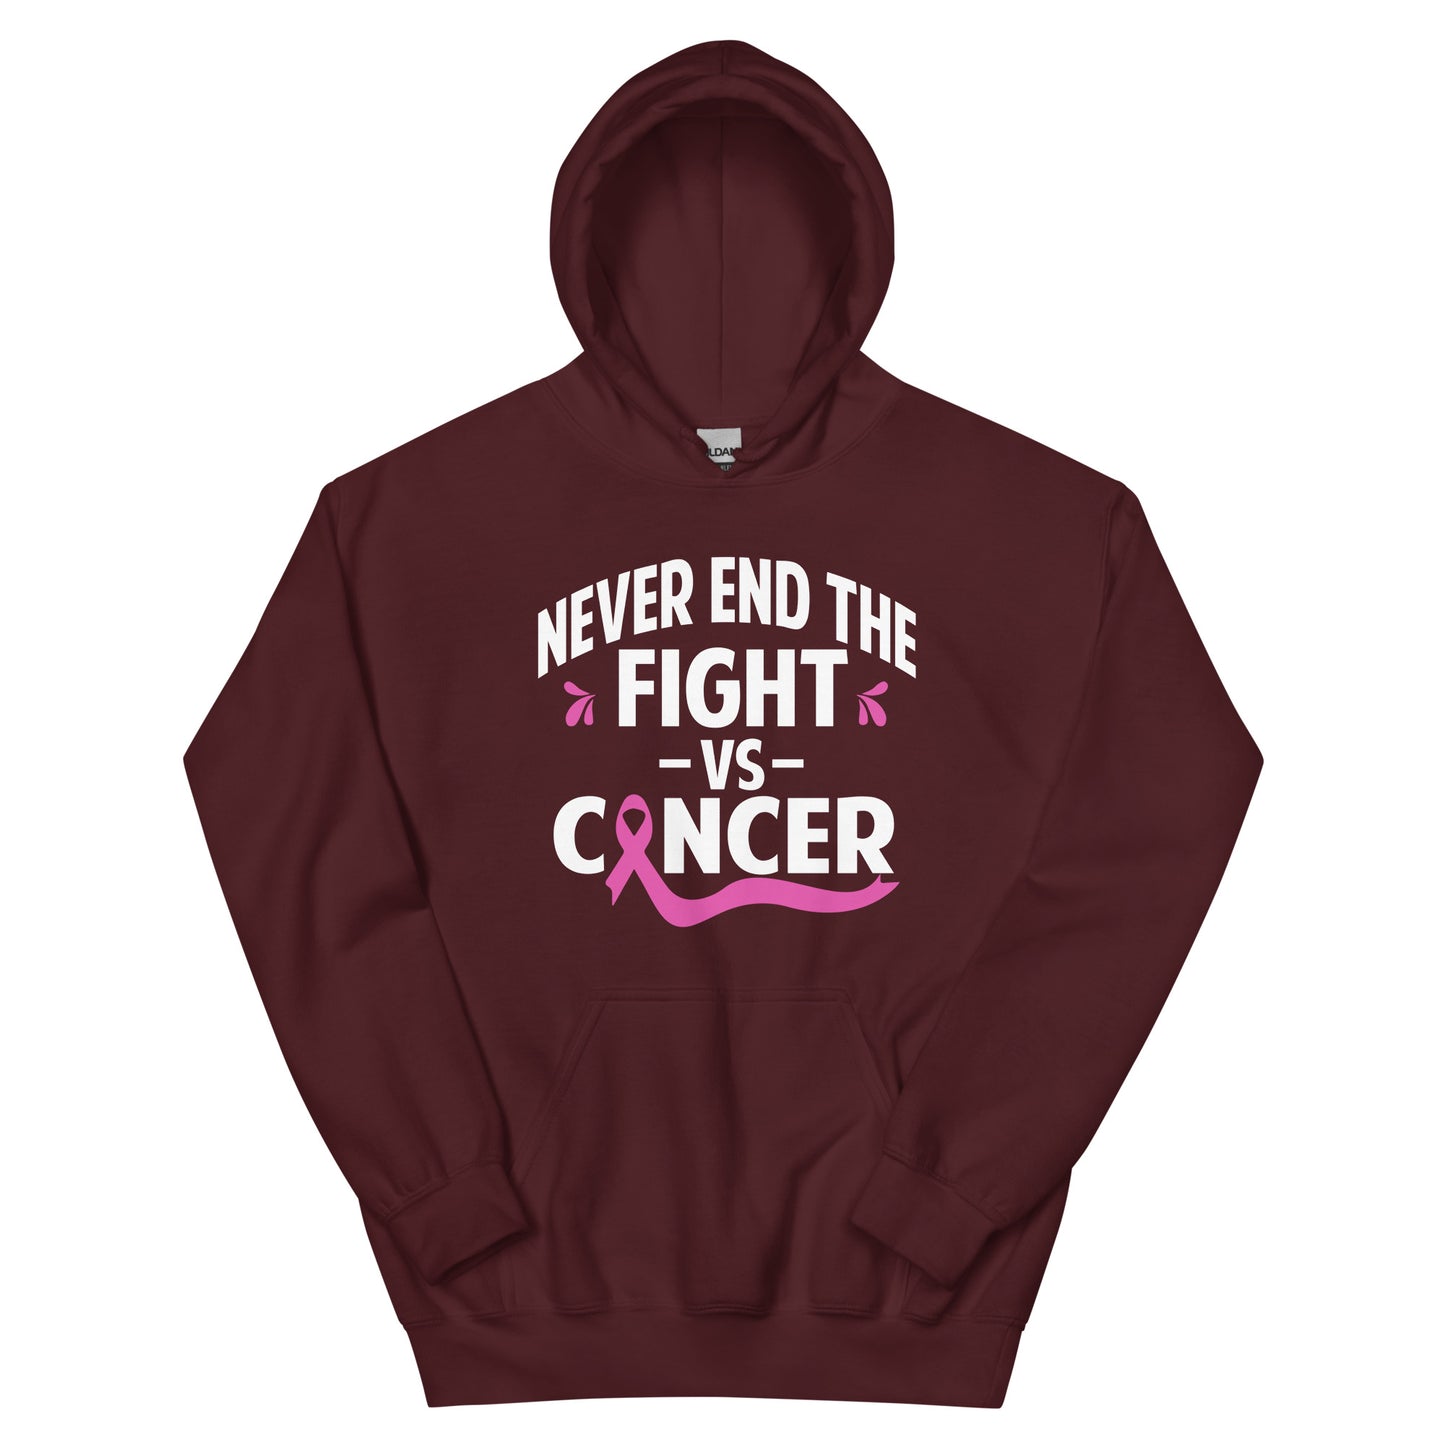 Never End The Fight Vs Cancer Unisex Hoodie